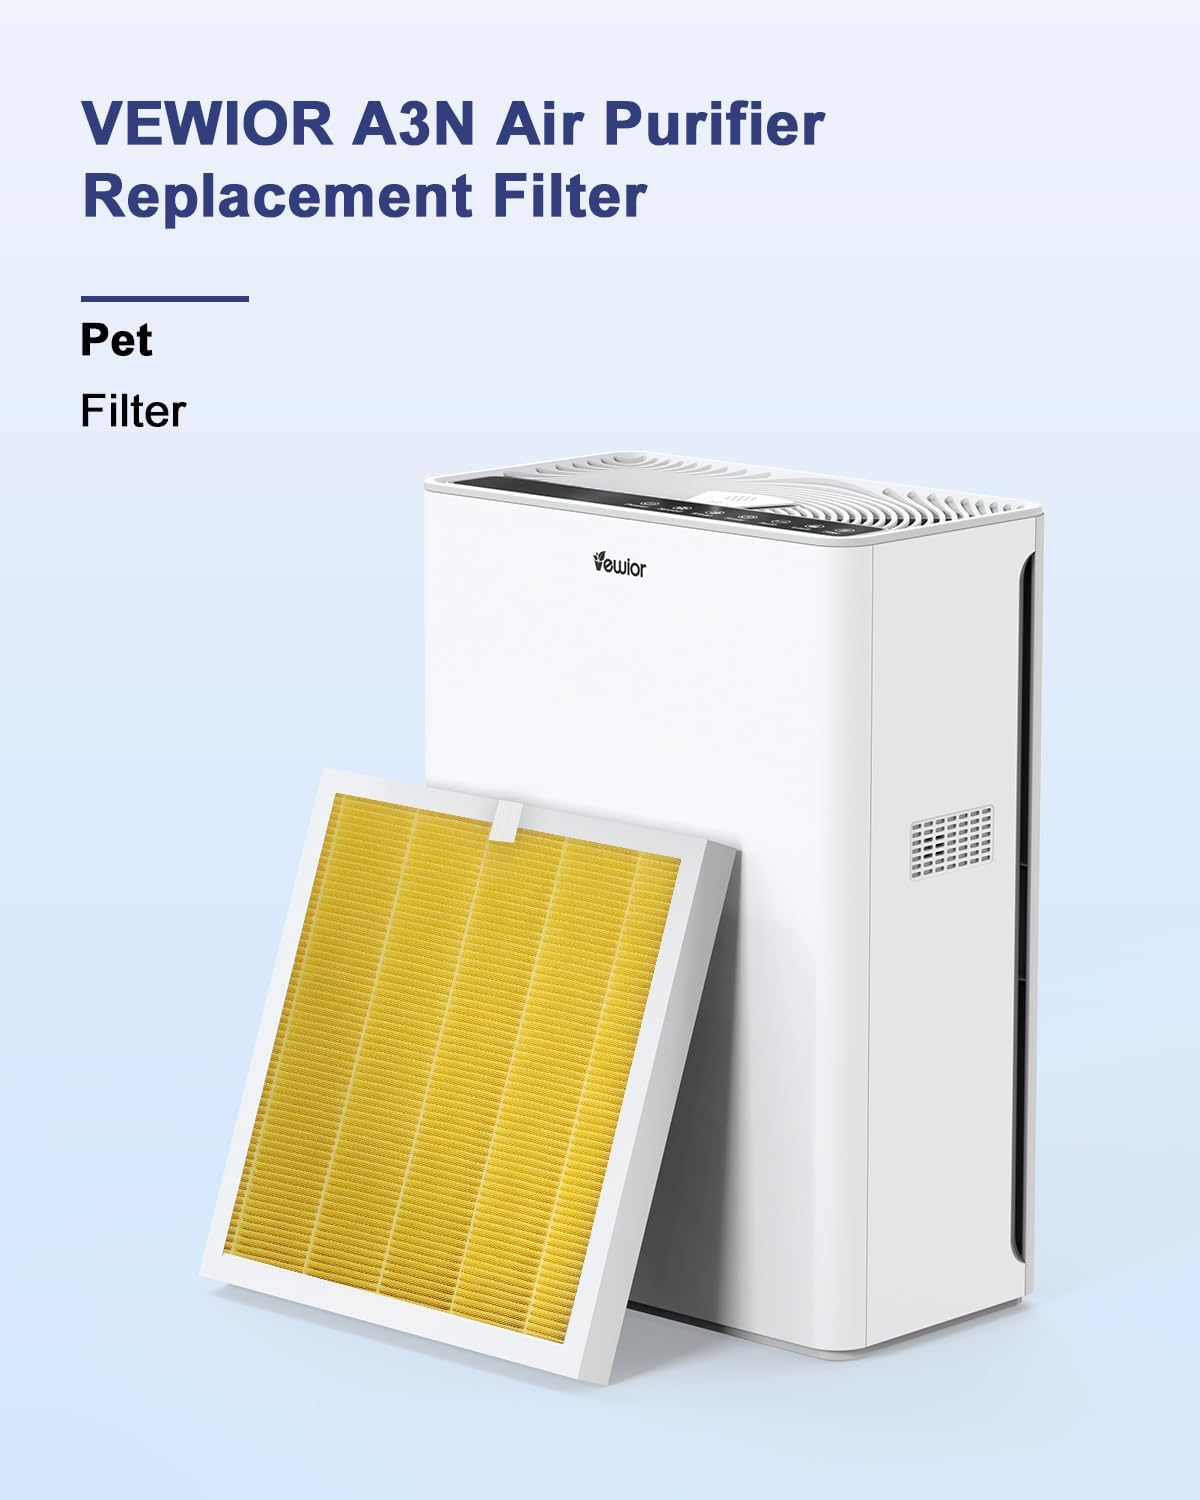 VEWIOR Official Replacement Filter True HEPA Replacement Filter, Compatible VEWIOR A3N Air Purifier, H13 True HEPA Filter for A3N Air Cleaner, Pet Filter